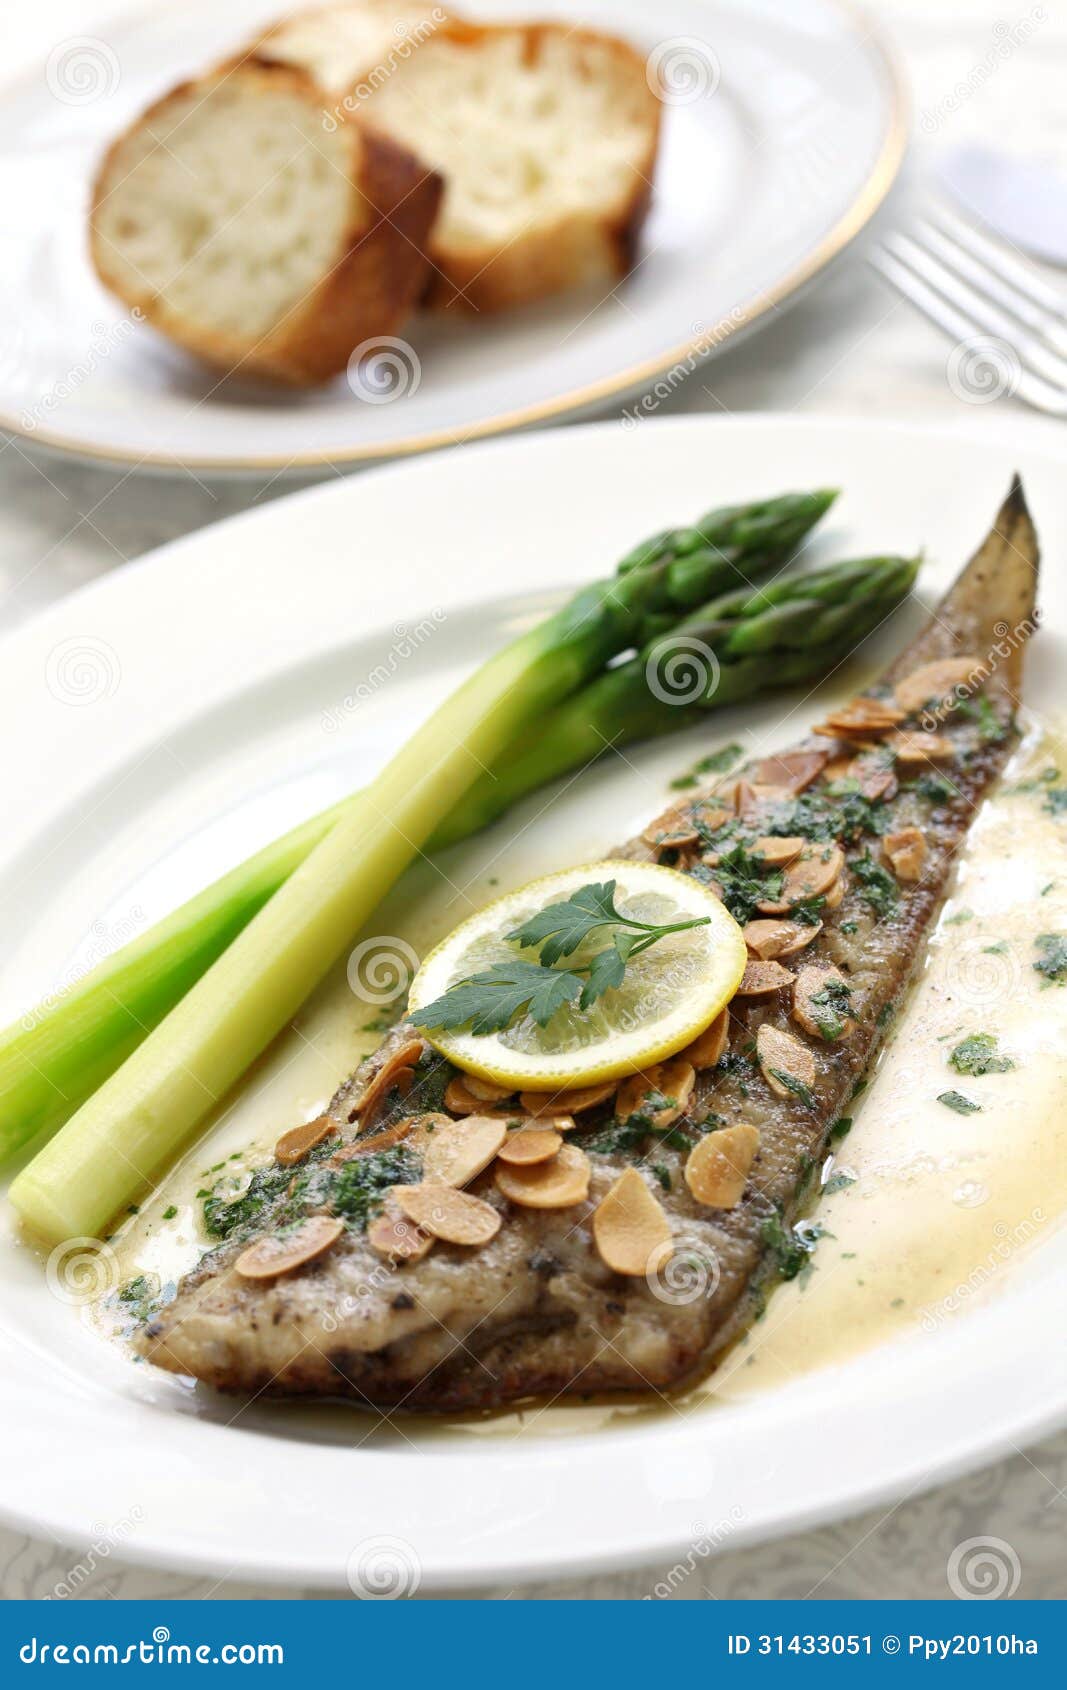 Sole meuniere stock image. Image of food, white, lunch - 31433051